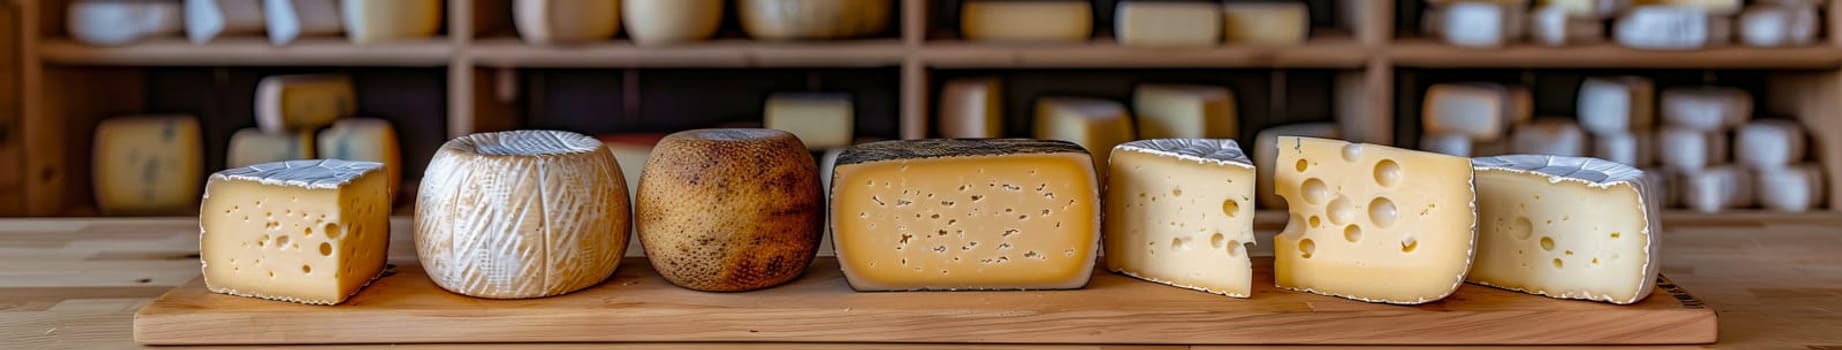 Assortment of various artisan cheeses on a wooden board. Shelves with ready-made cheeses in the background. Small business, home cheese factory. Banner.